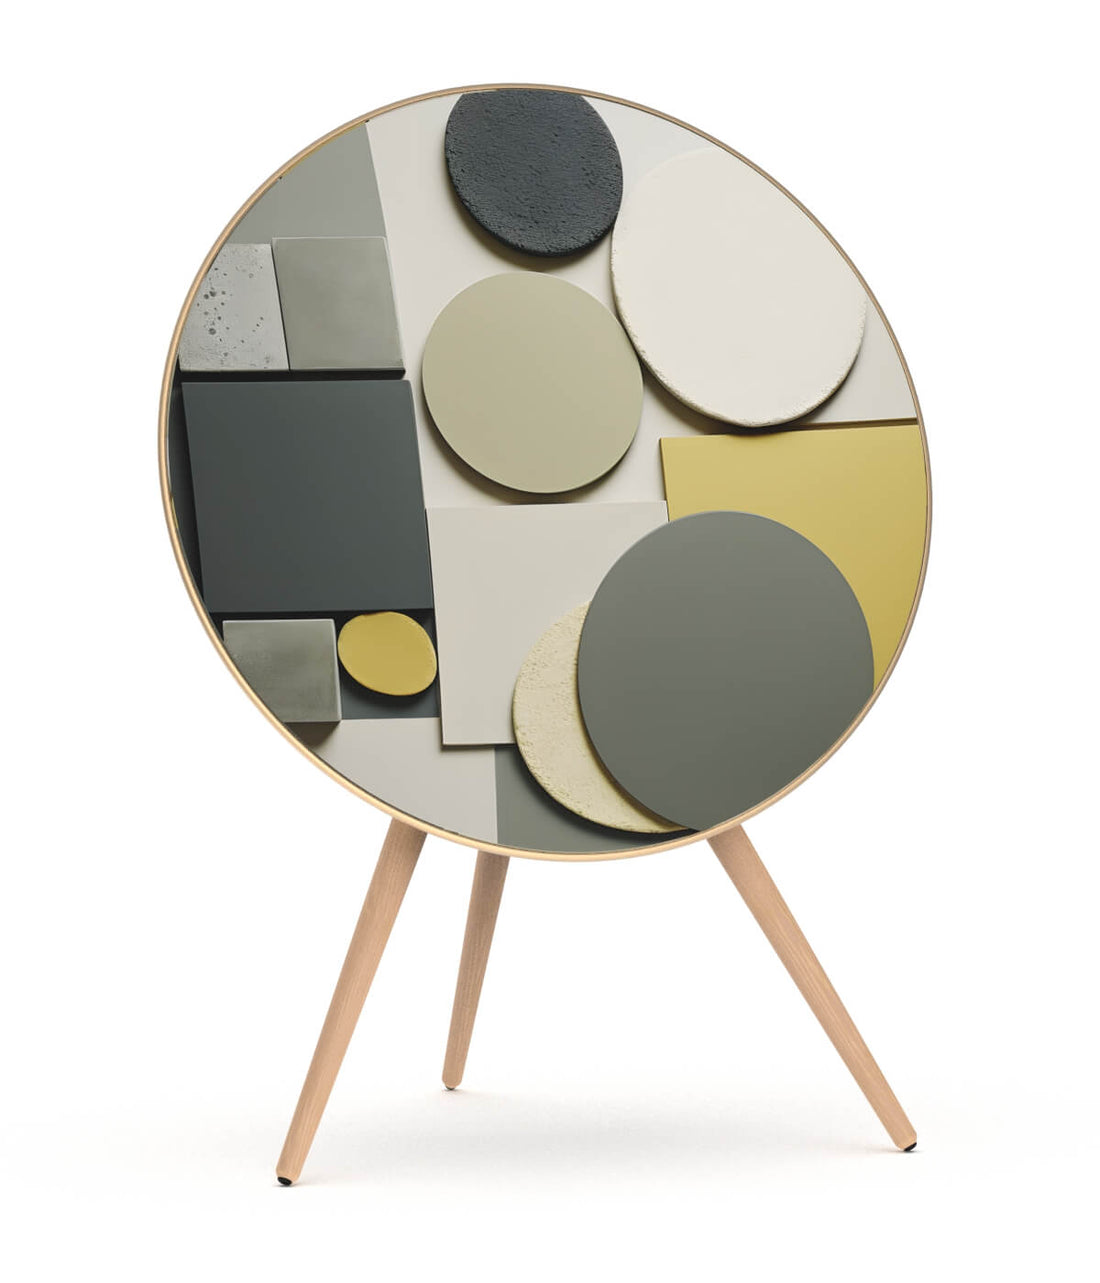 Skiniplay cover Palette for Bang & Olufsen Beoplay A9 and Beosound A9 speaker